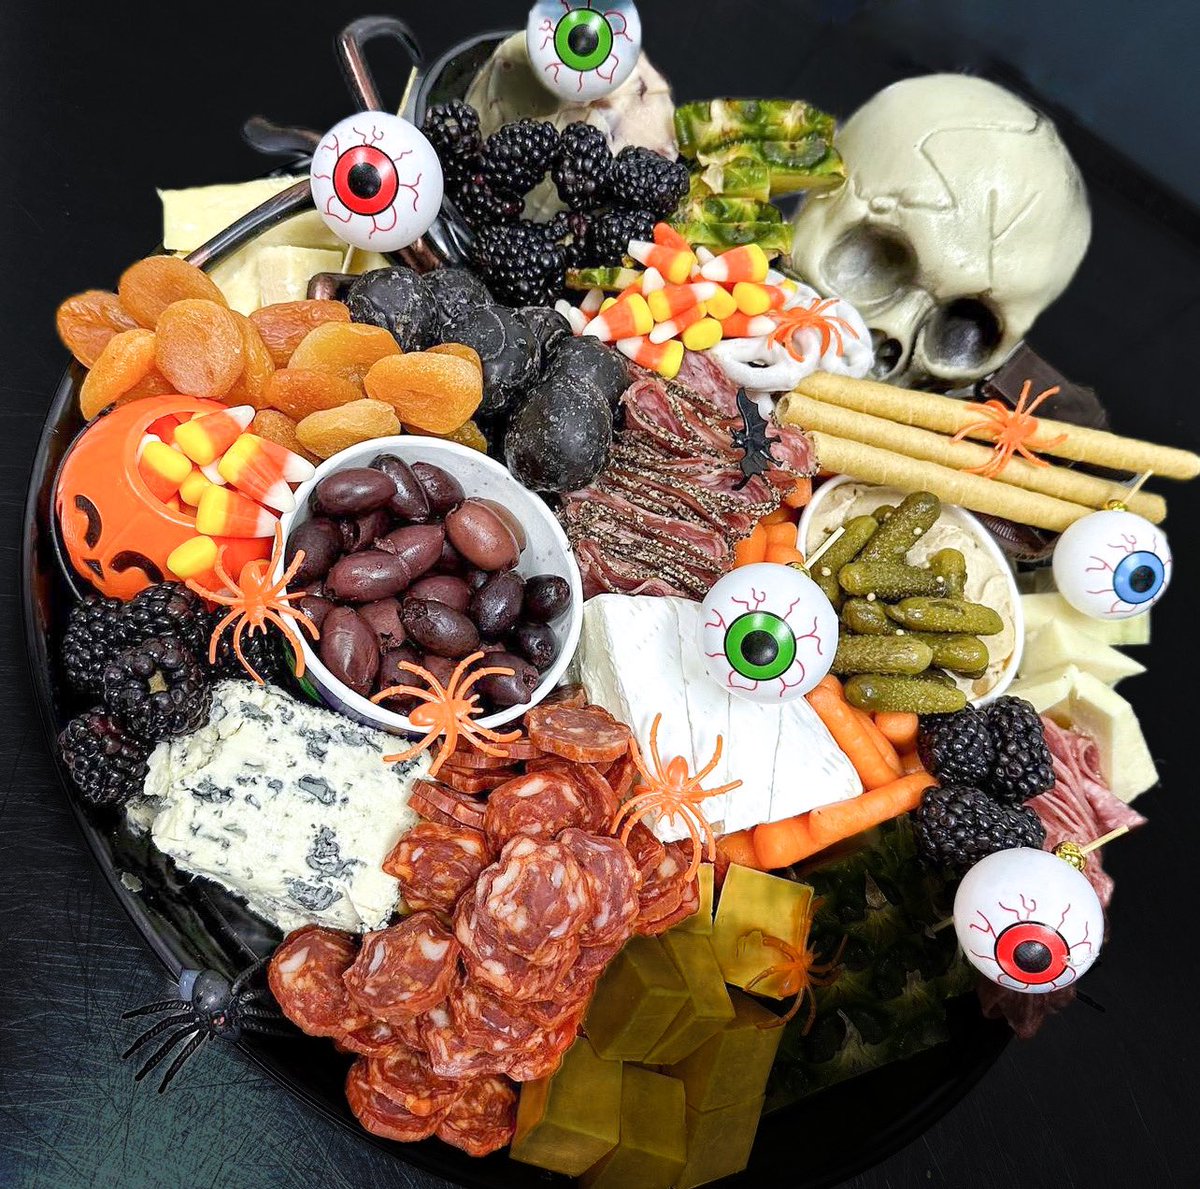 🎃💀Spooky Delicious from @krewedefromage 🥳!!
📷 #krewedefromage 
#halloweenfood #partyfoodideas #nycfood #nycbesteats #grazingplatter #festivefood #funfood #madeinnyc 
#nyccommercialkitchen #nycsharedcommercialkitchen #nyckitchenrental #nycrentalkitchen #harlemny #eterrakitchen